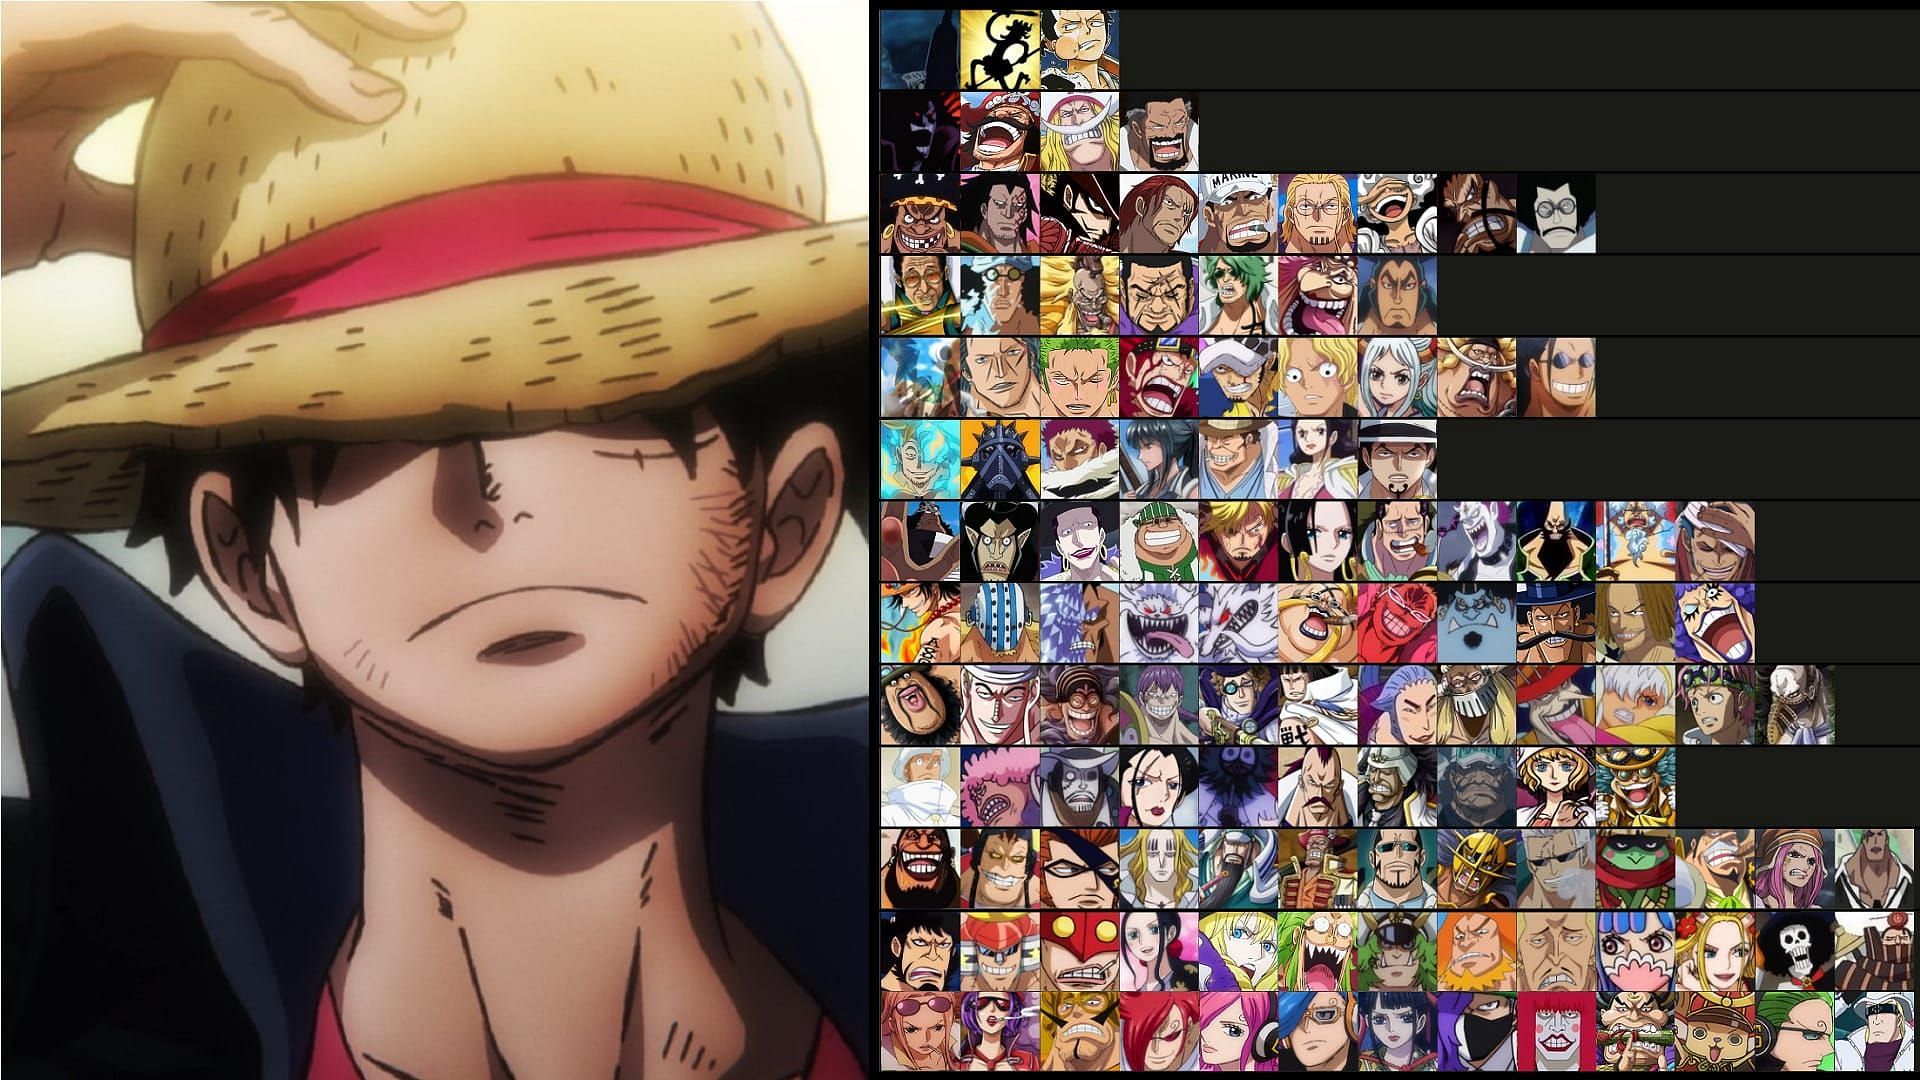 One Piece gifted fans an amazing 2022: now its time to rank the 100 strongest characters of the series (Image via Eiichiro Oda/ Shueisha, One Piece)